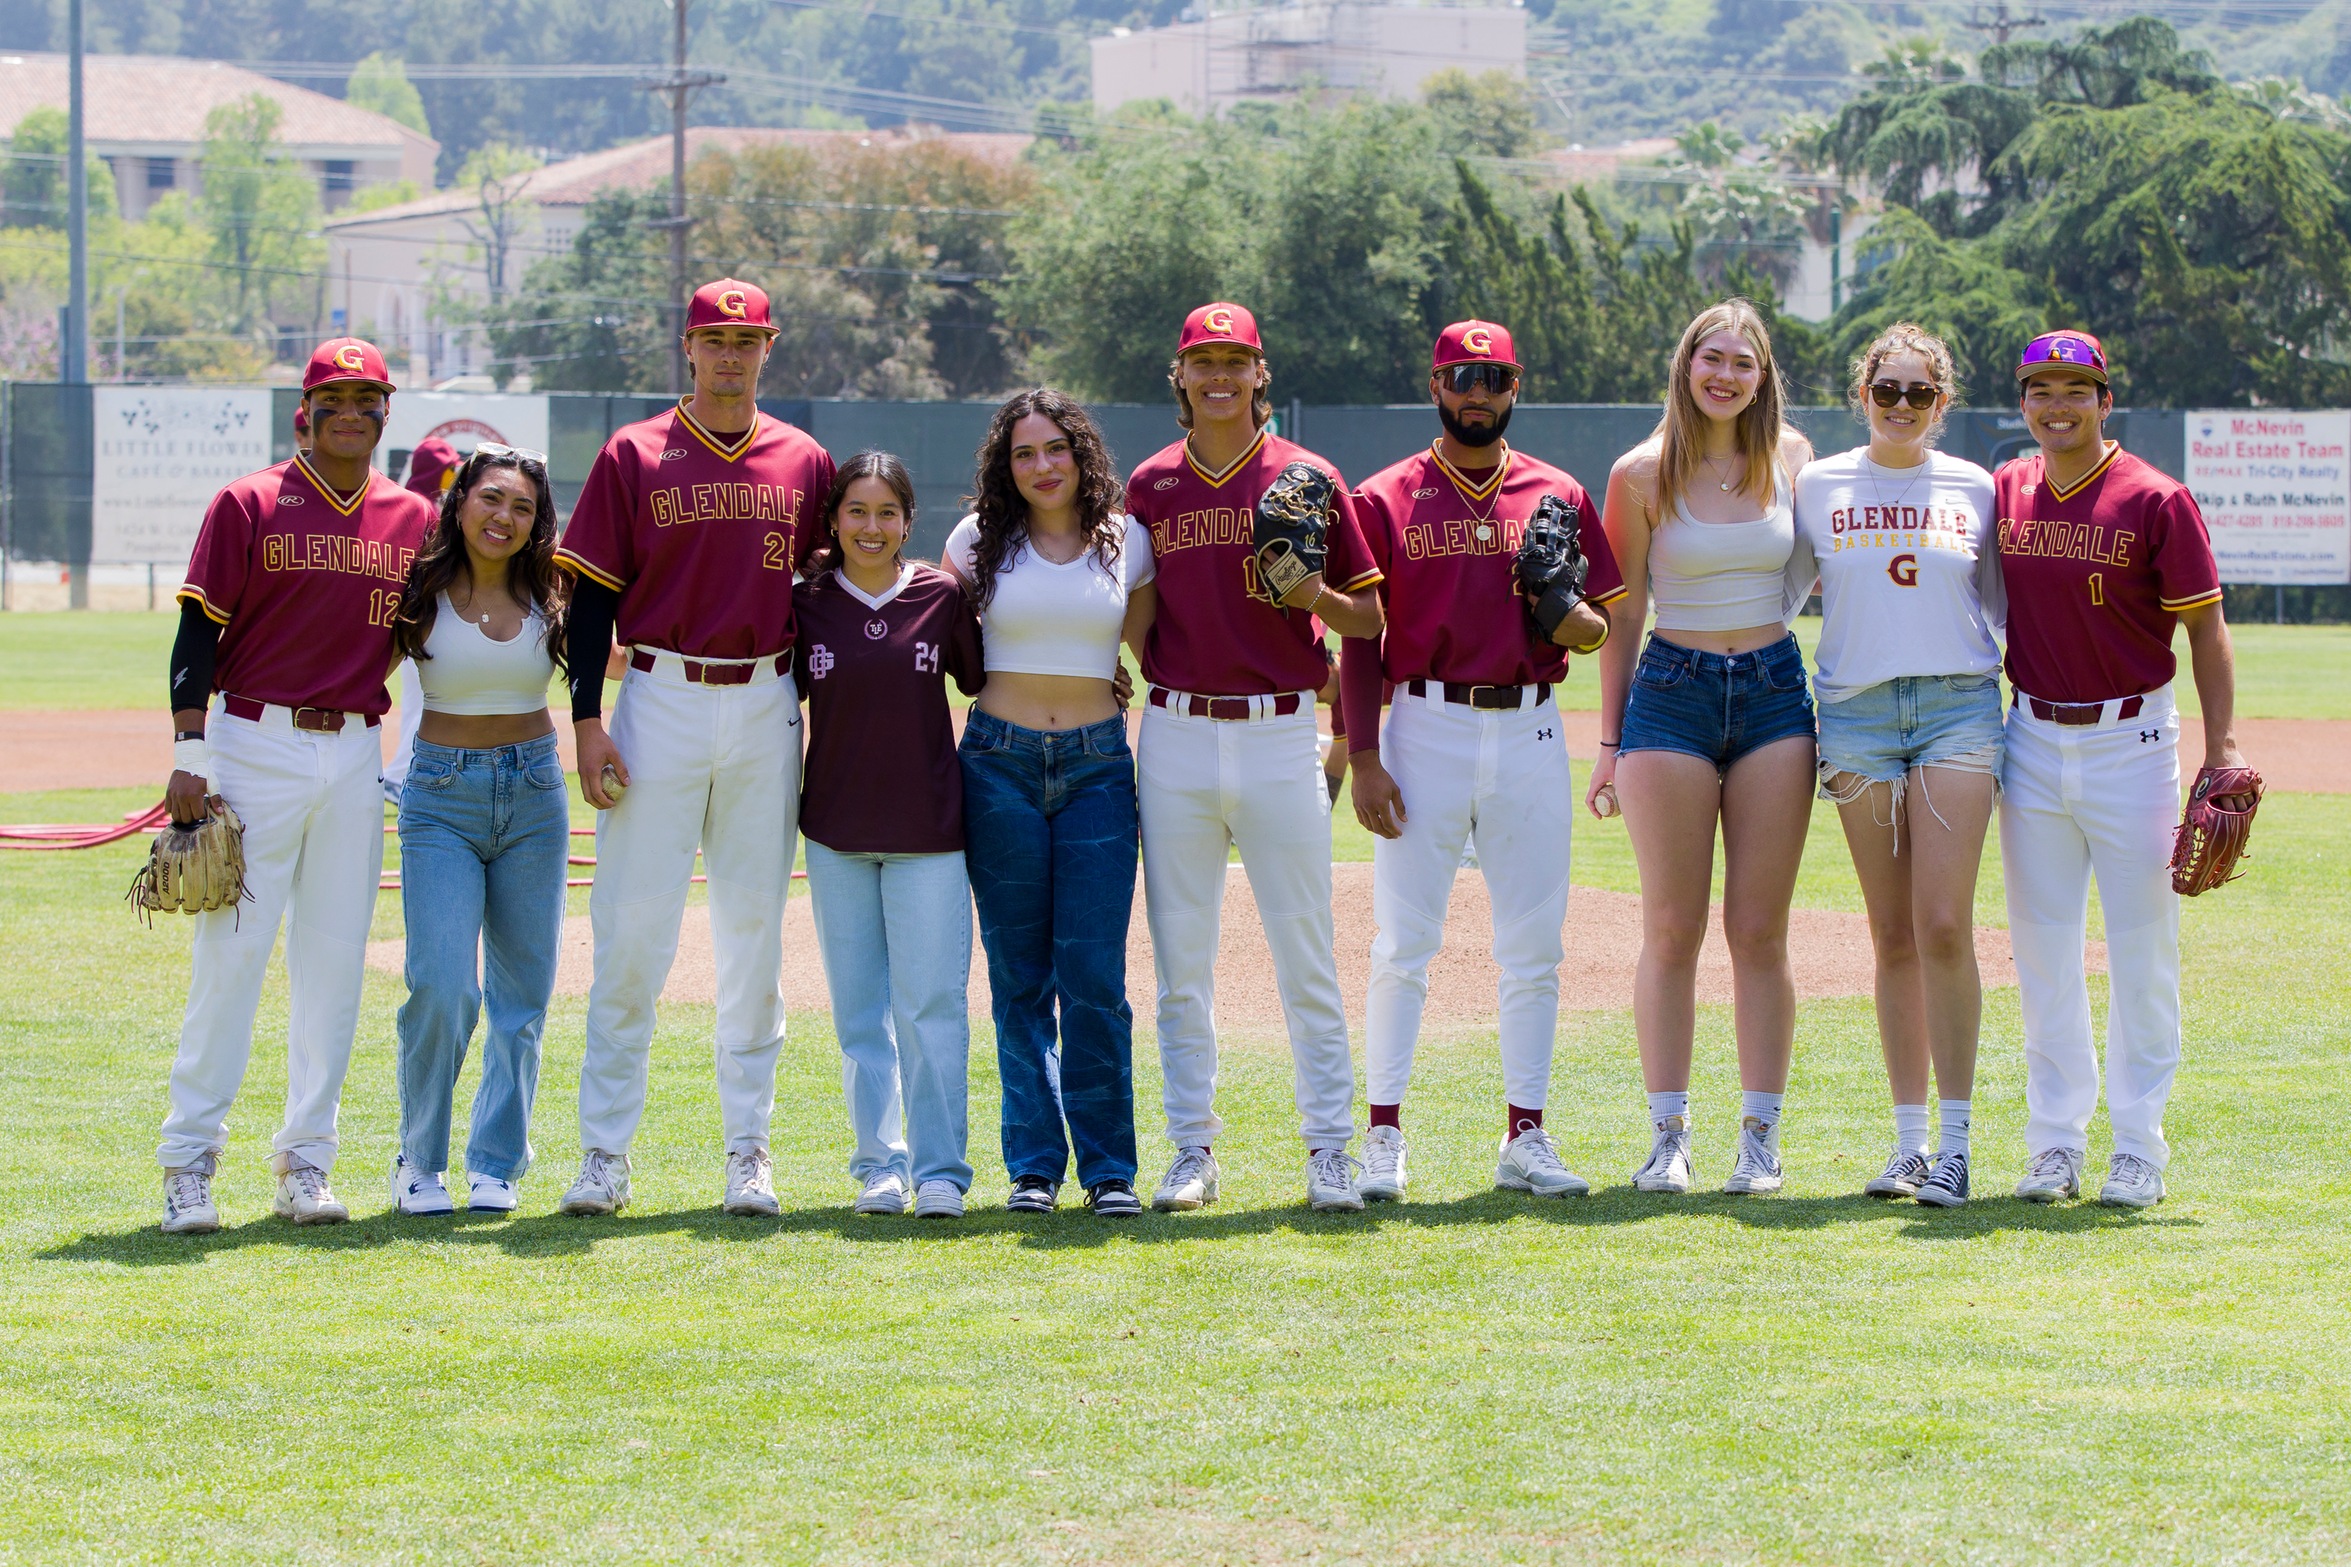 GCC Baseball beats Citrus College 5-0 April 20; WBB players throw out the first pitch to celebrate WSC South Title